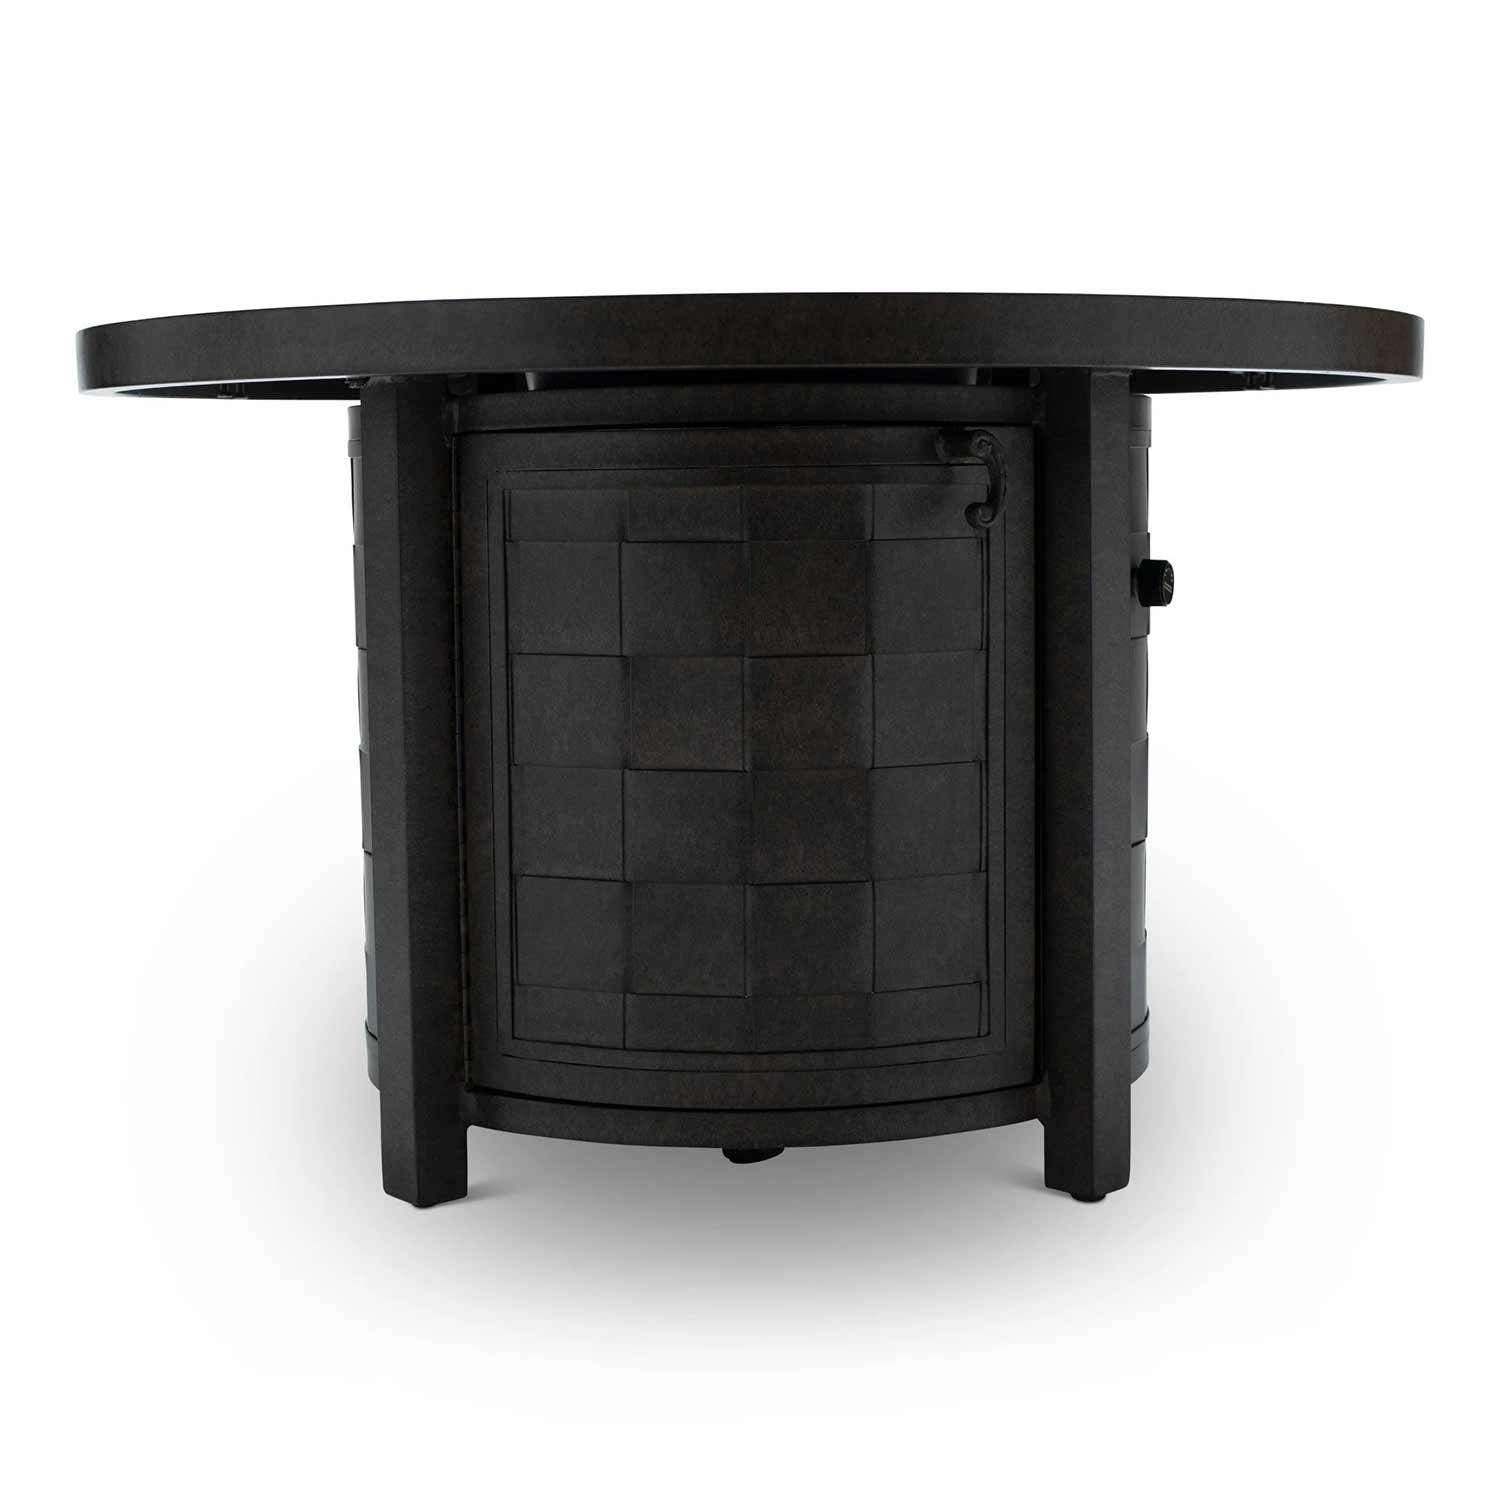 Castelle Classical 40 inch Round Fire Pit with Forged Top and Antique Walnut Finish Fireplaces 12028031